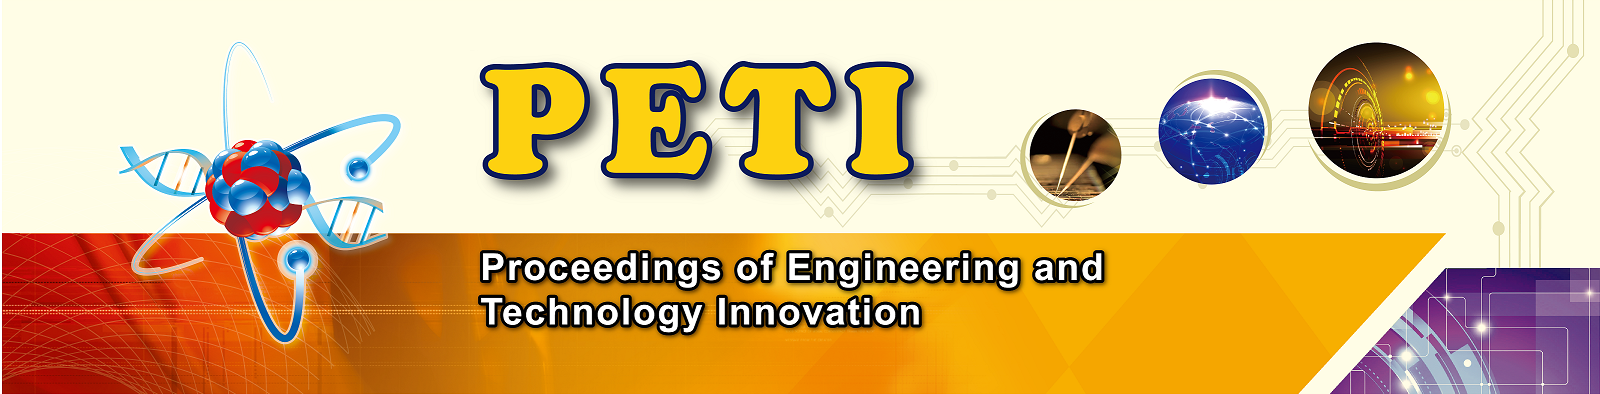 Proceedings of Engineering and Technology Innovation